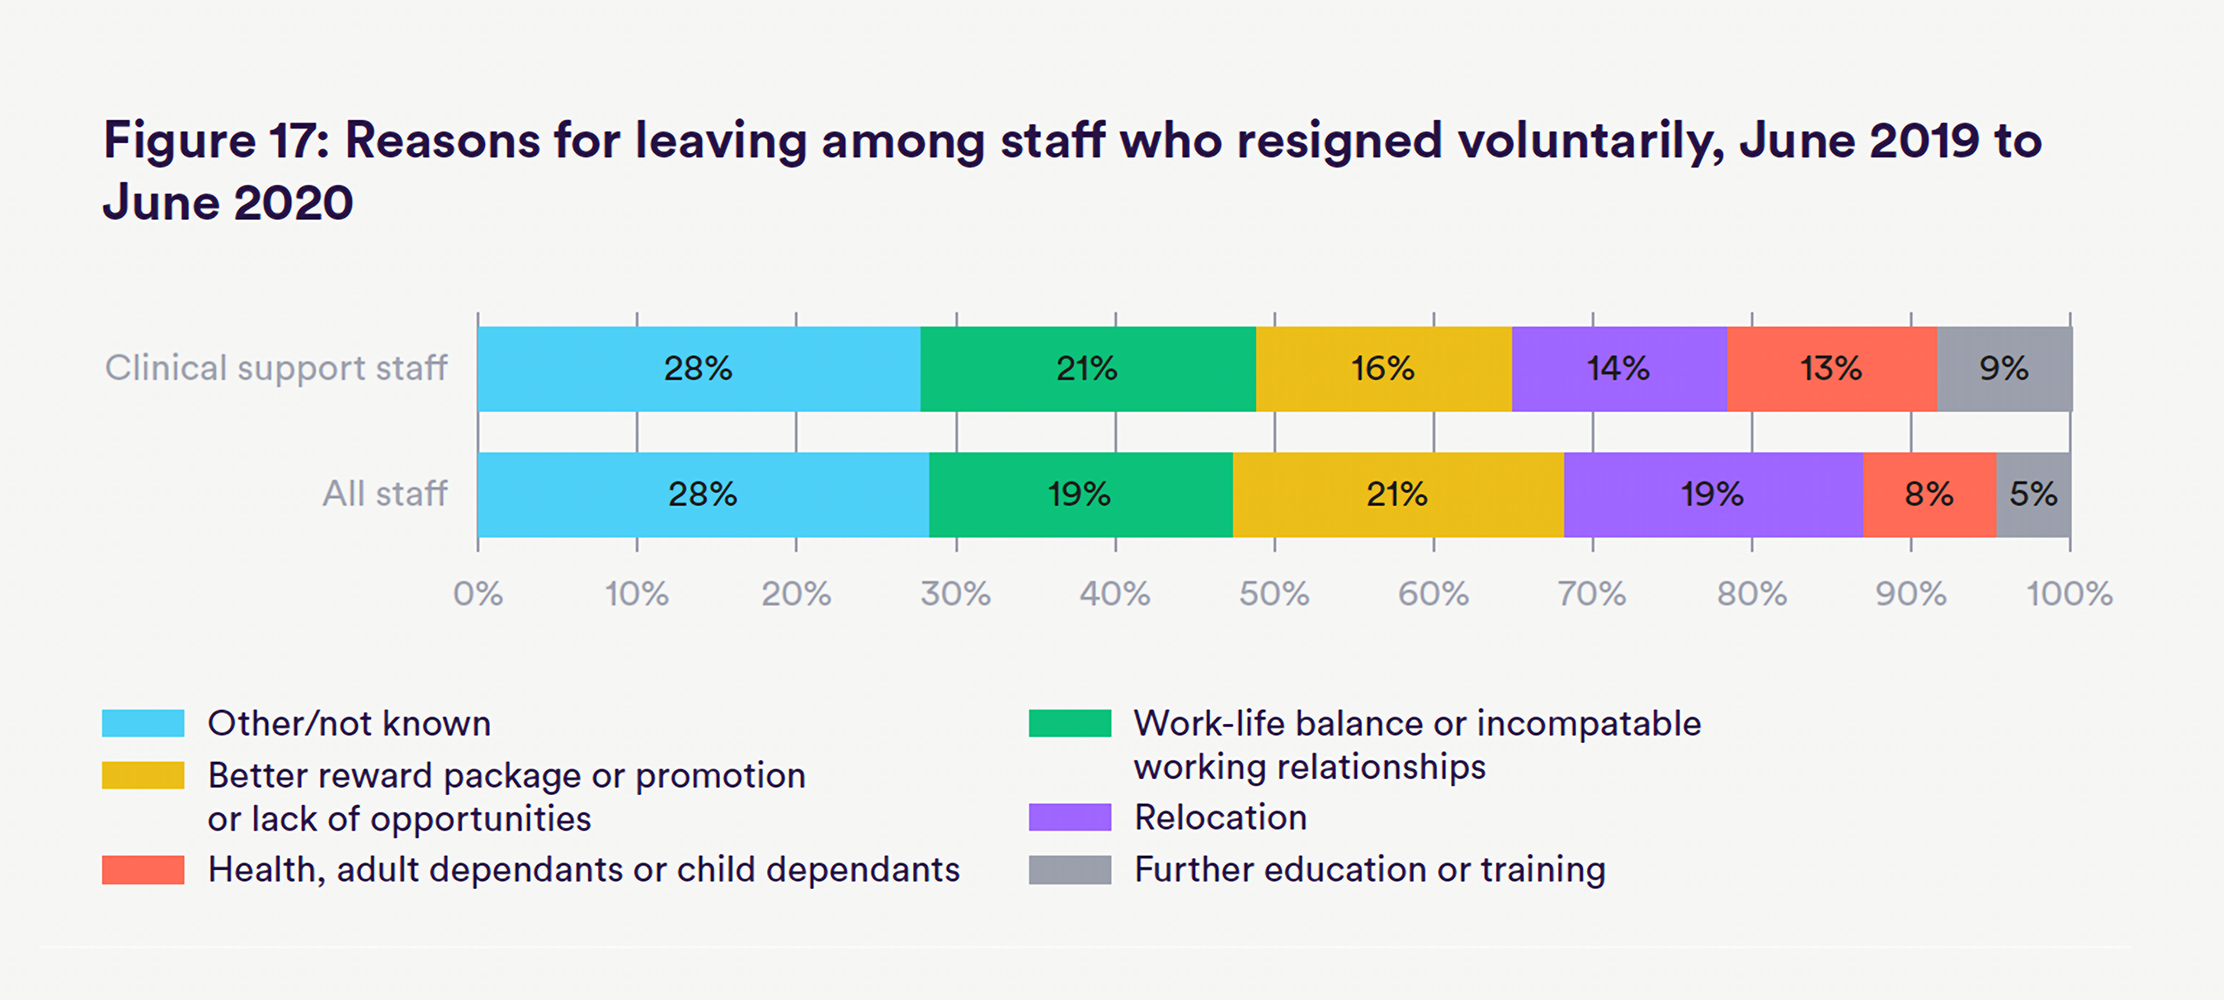 Reasons for leaving among staff who resigned voluntaryily, June 2019 to June 2020